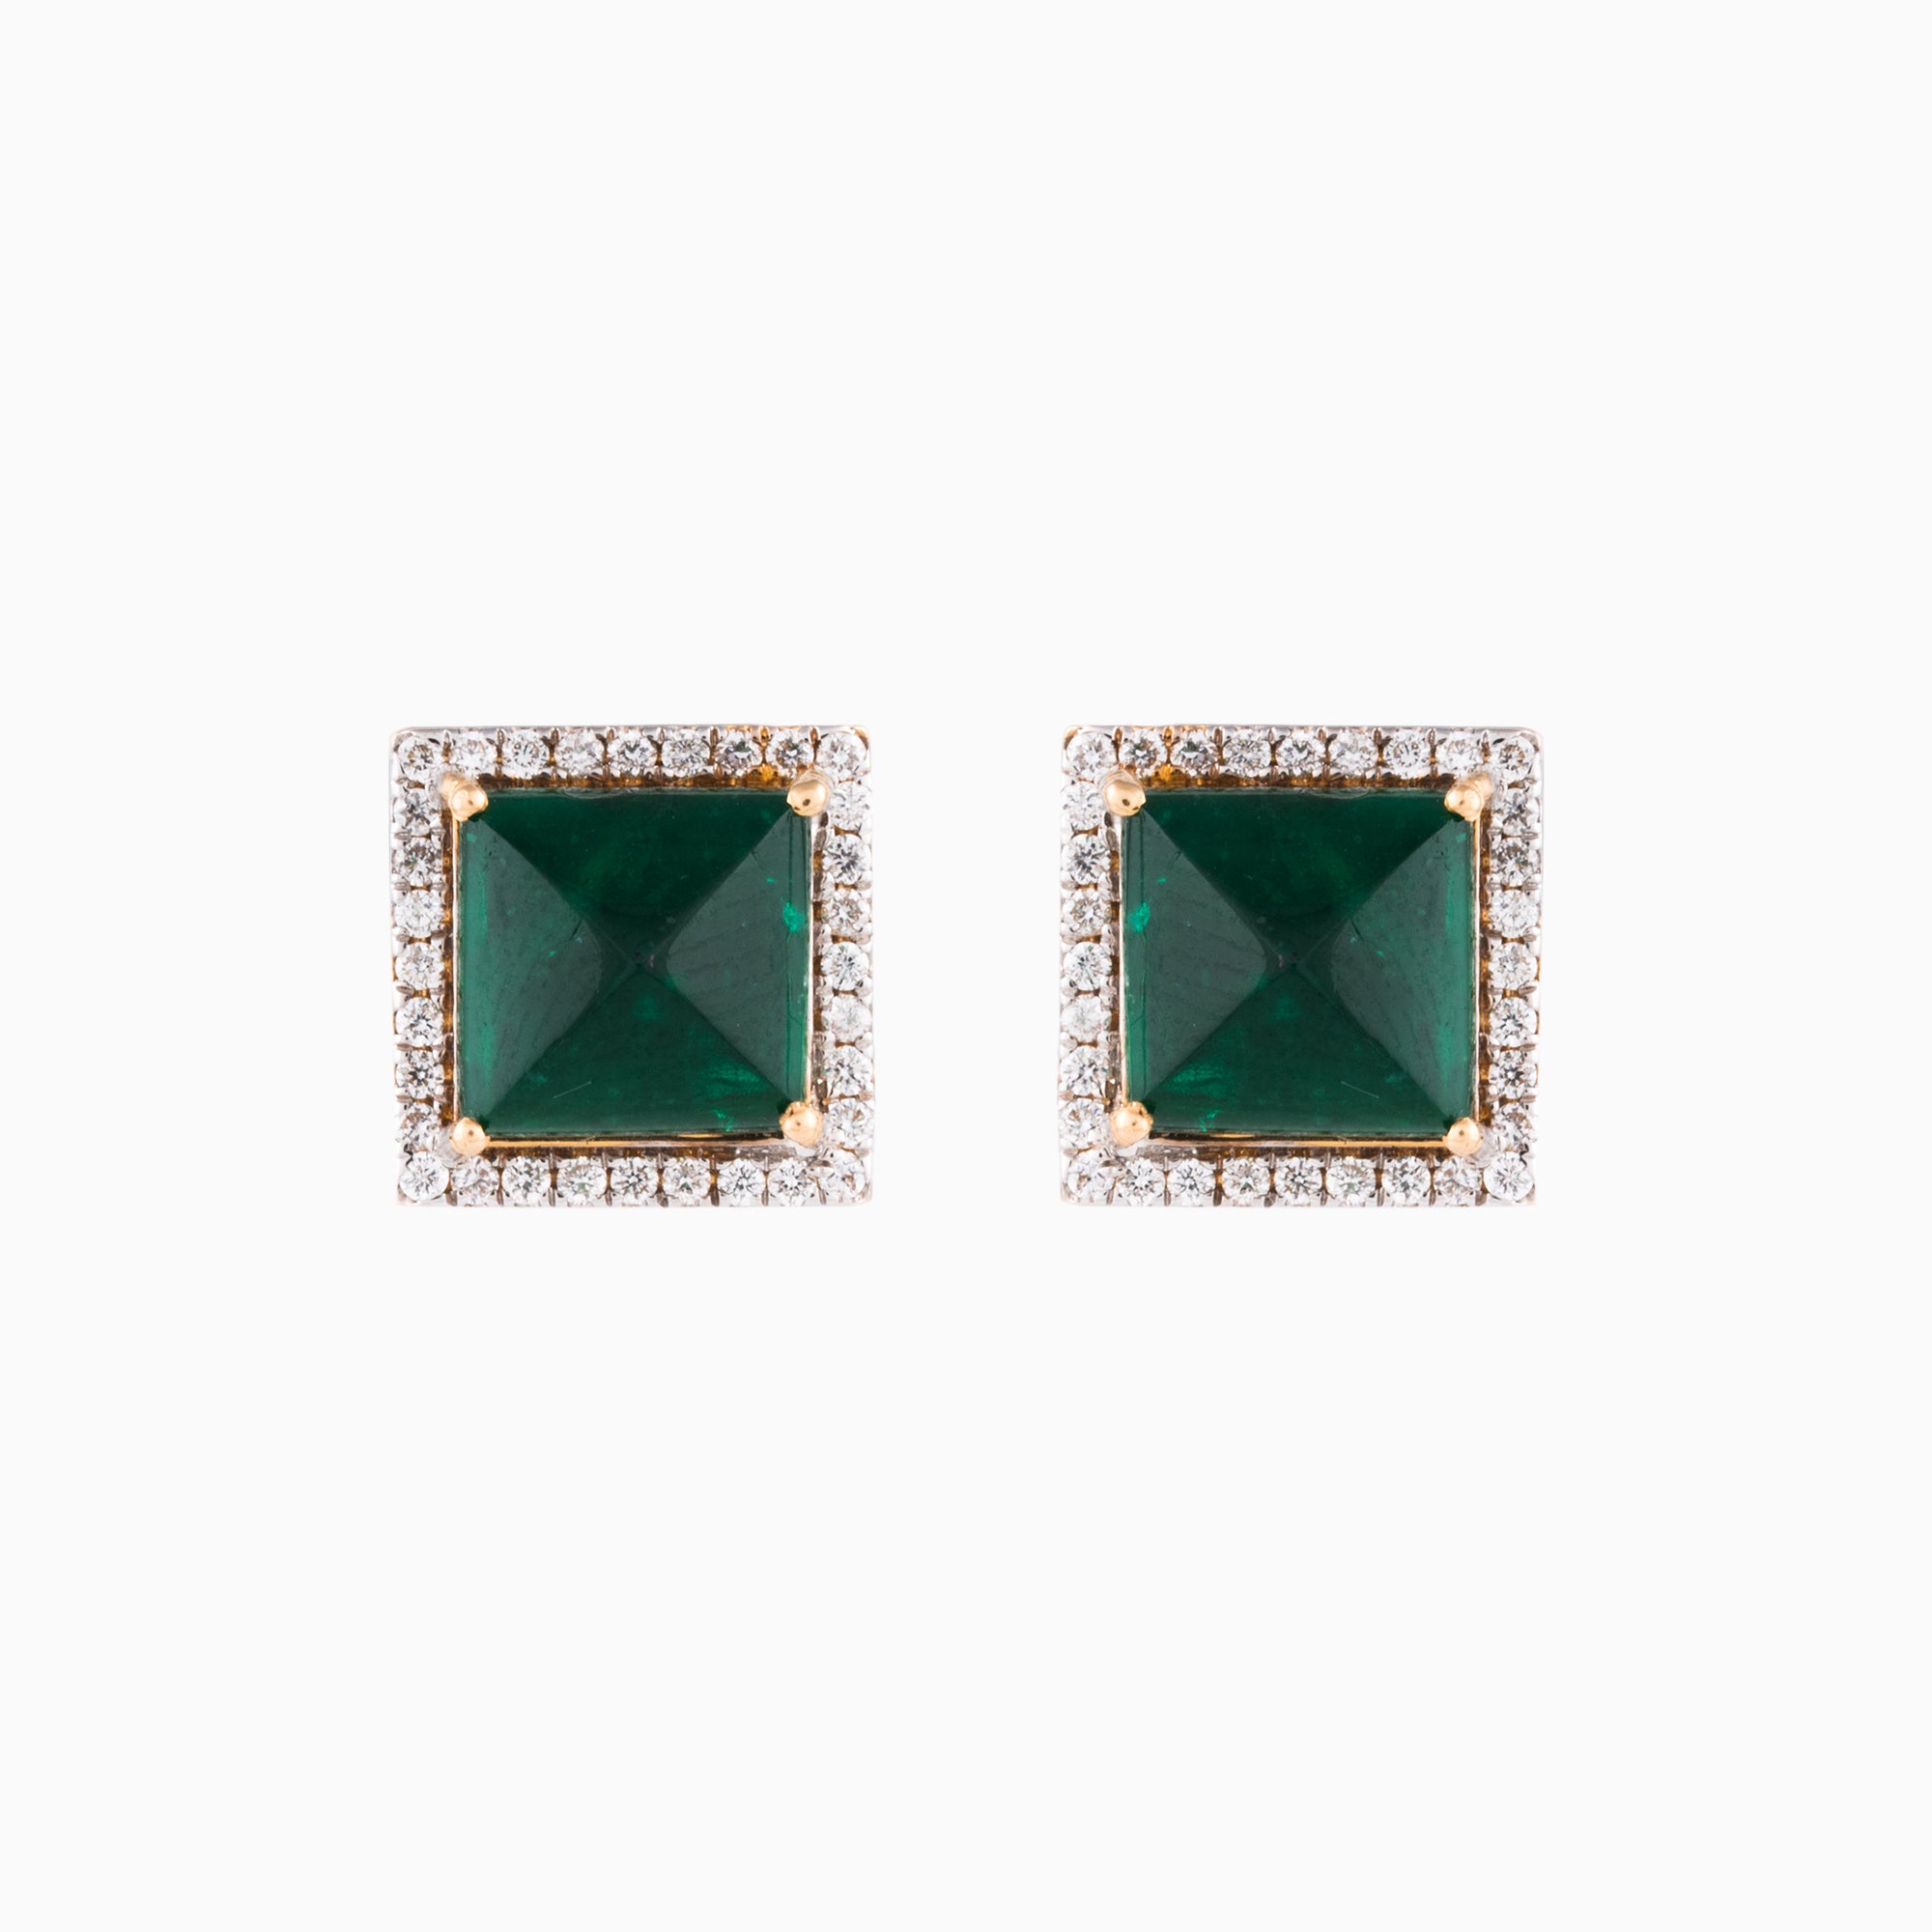 Earring Pair with Round Cut Diamond and Emerald-PGDE0224